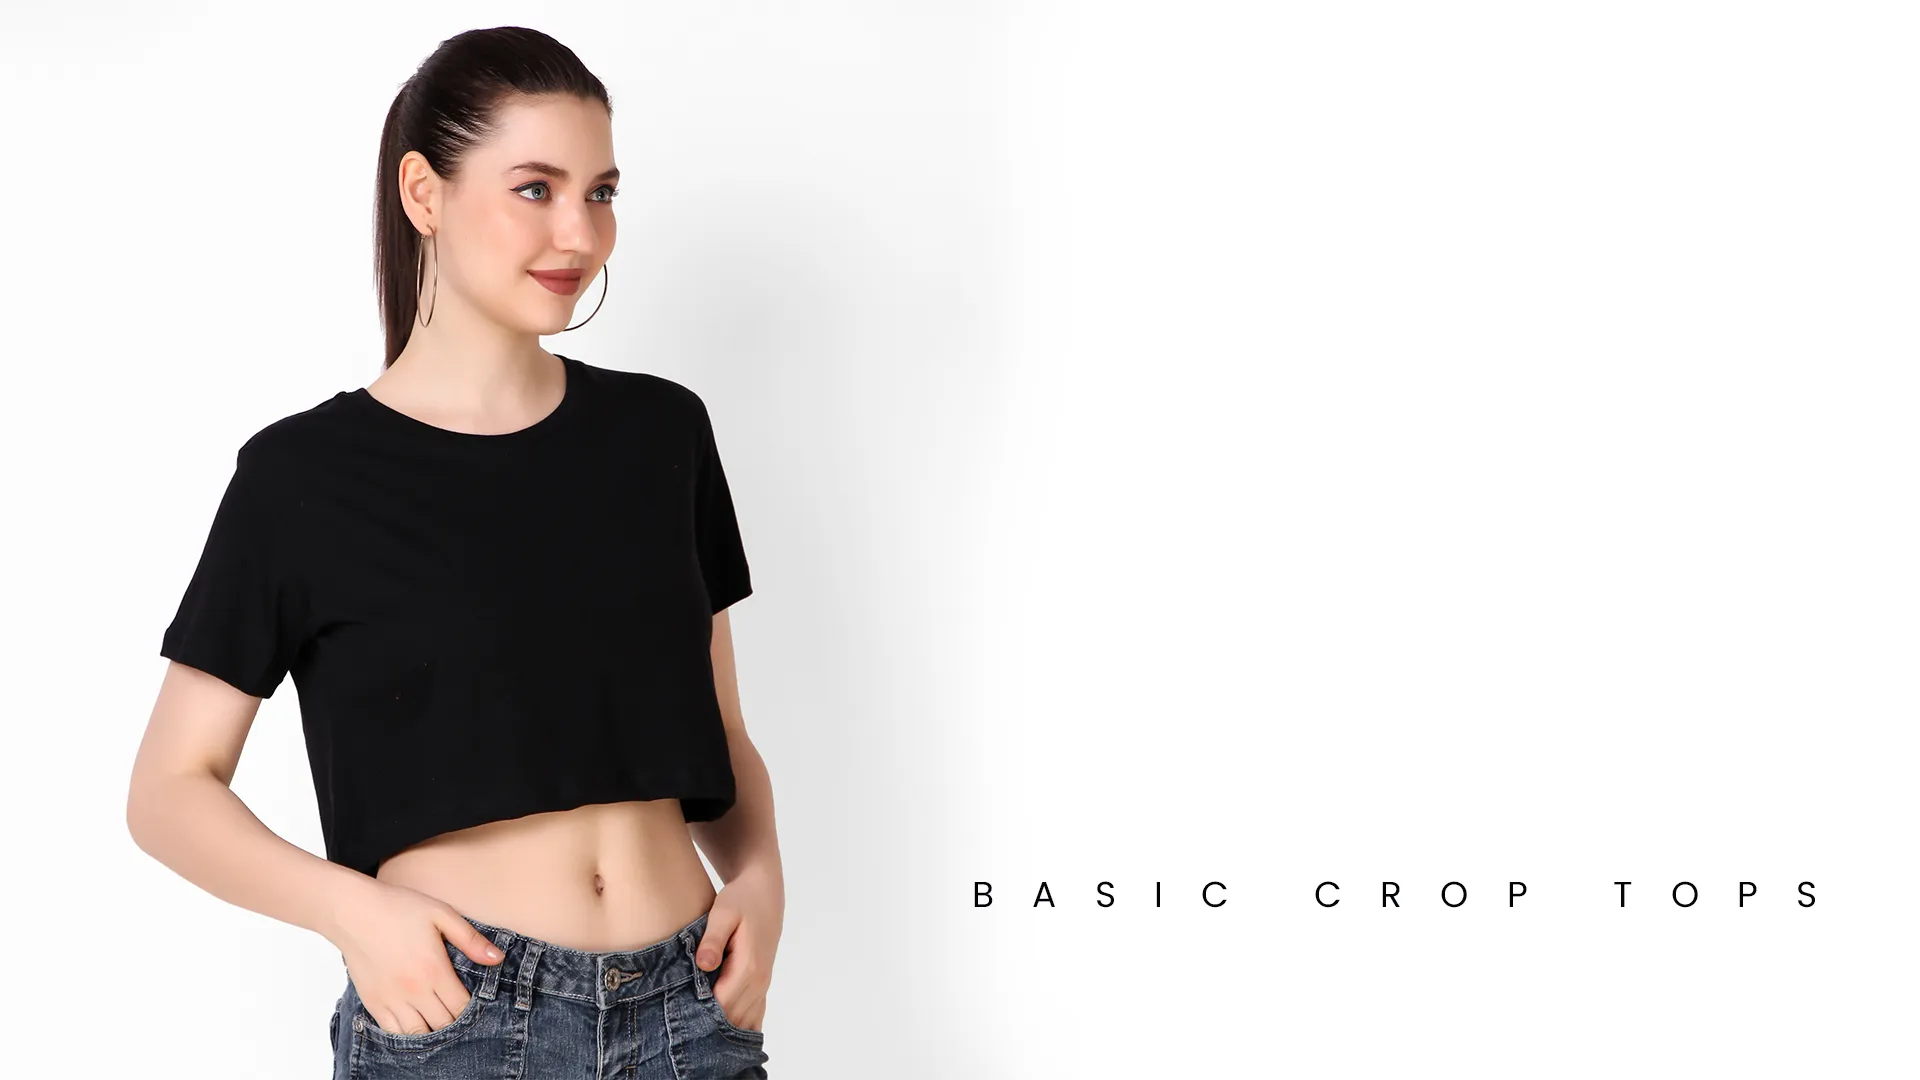 6 Types Of Crop Tops That Every Fashionista Should Own